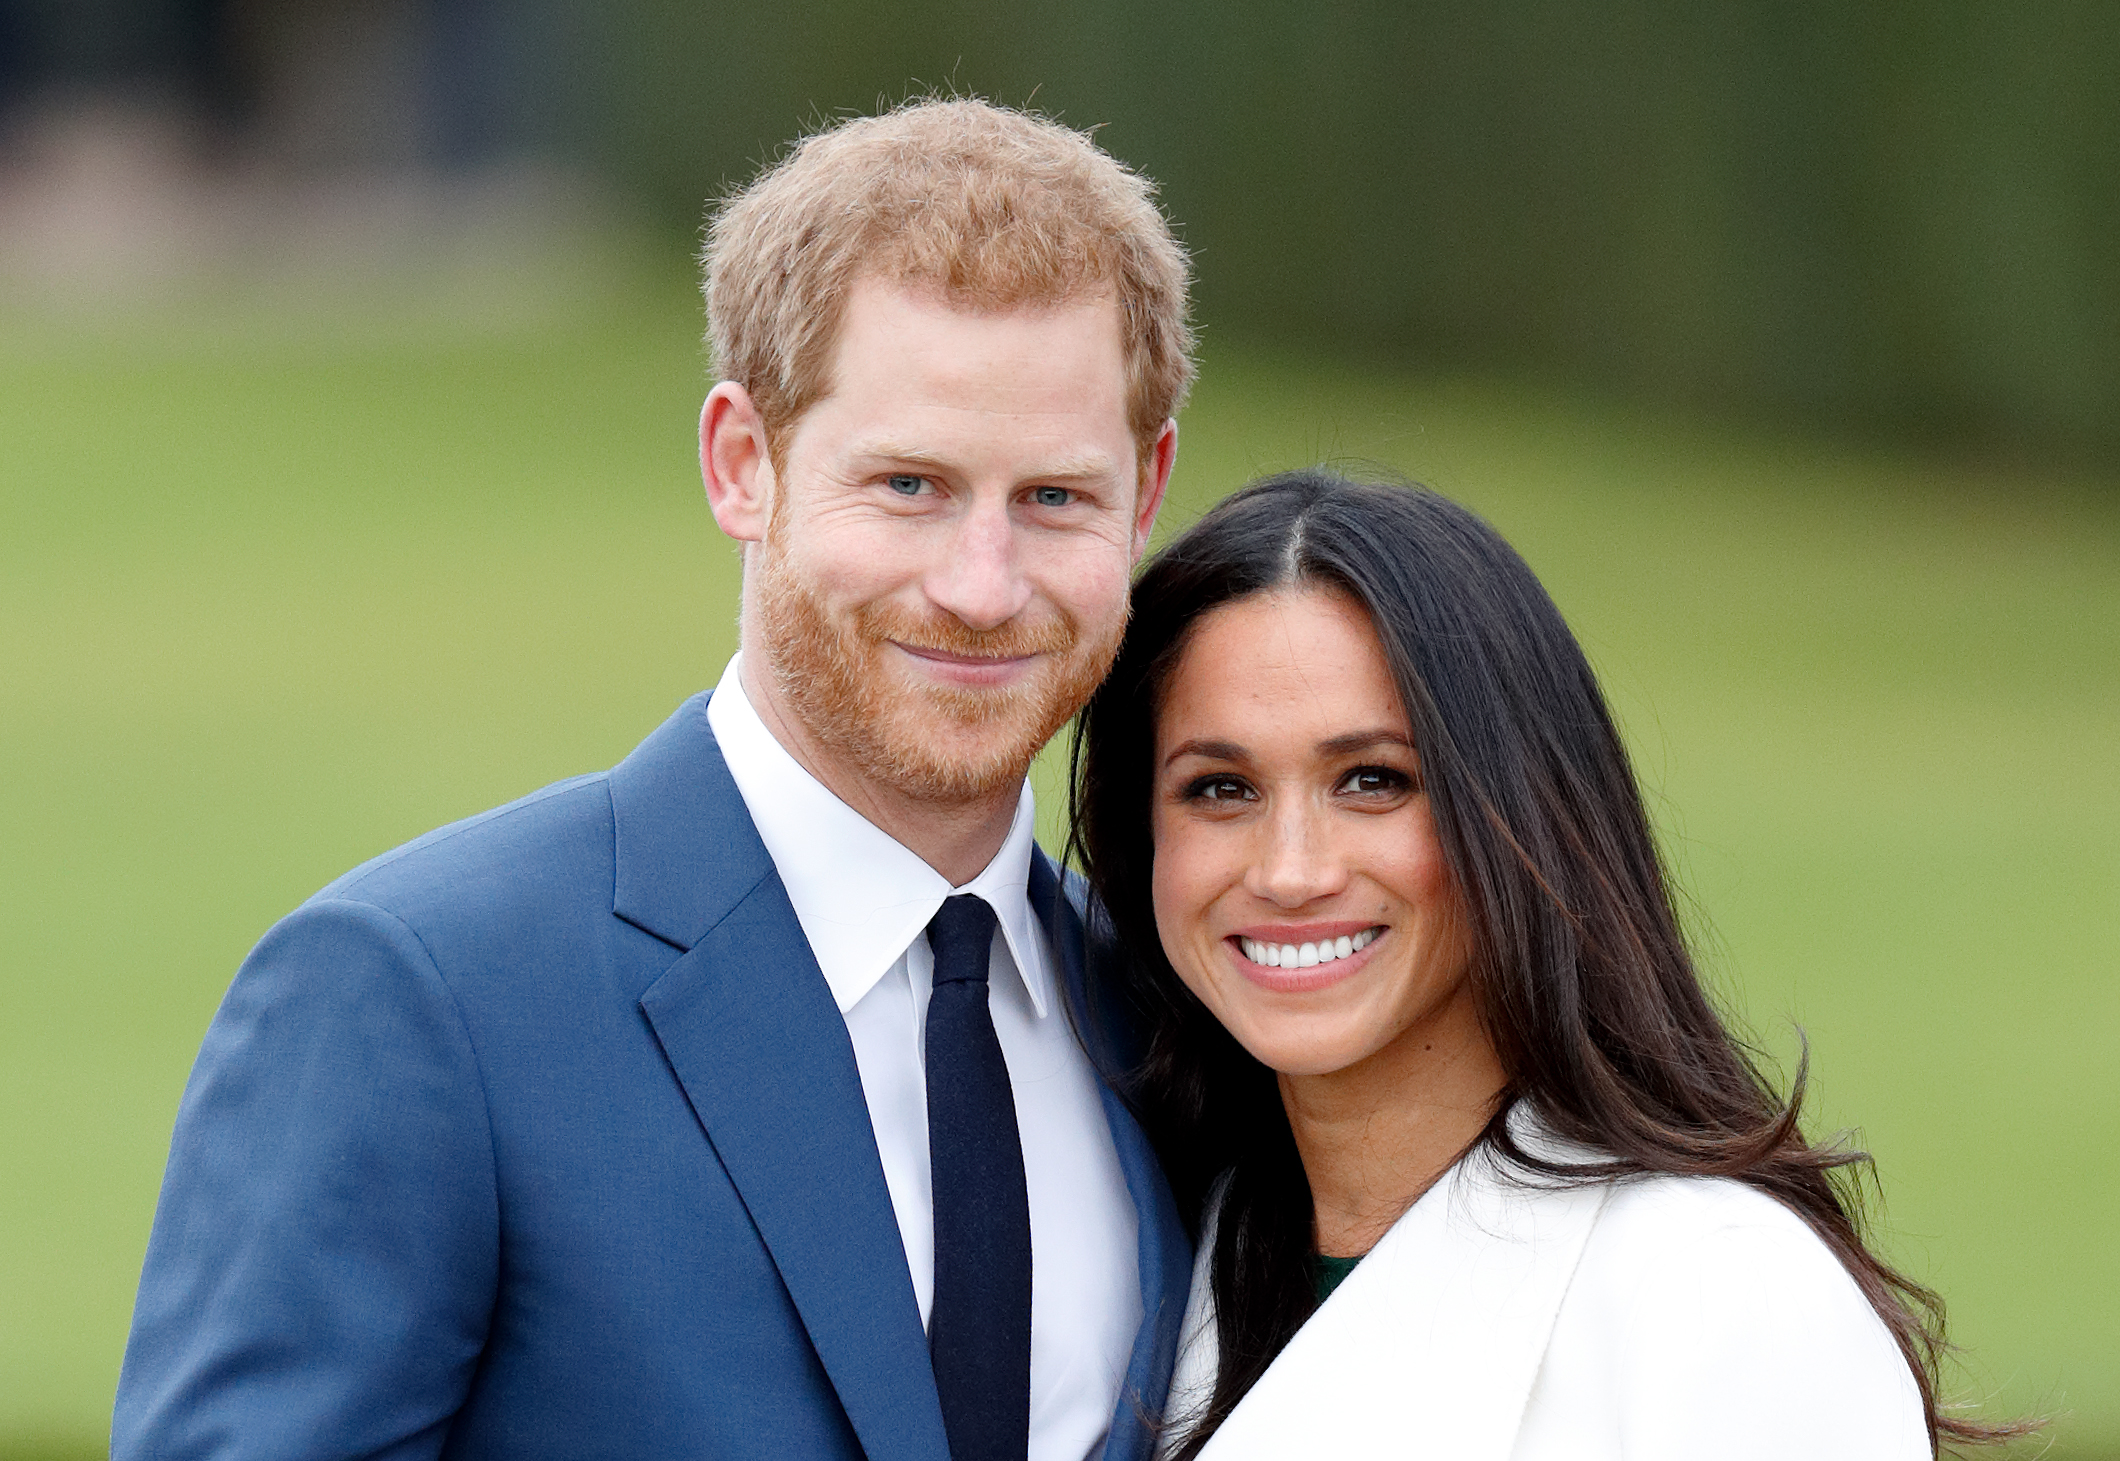 Prince Harry and Meghan Markle attend an official photocall to announce their engagement at The Sunken Gardens, Kensington Palace on November 27, 2017 in London, England.  Prince Harry and Meghan Markle have been a couple officially since November 2016 and are due to marry in Spring 2018. (Max Mumby - Indigo/Getty Images)